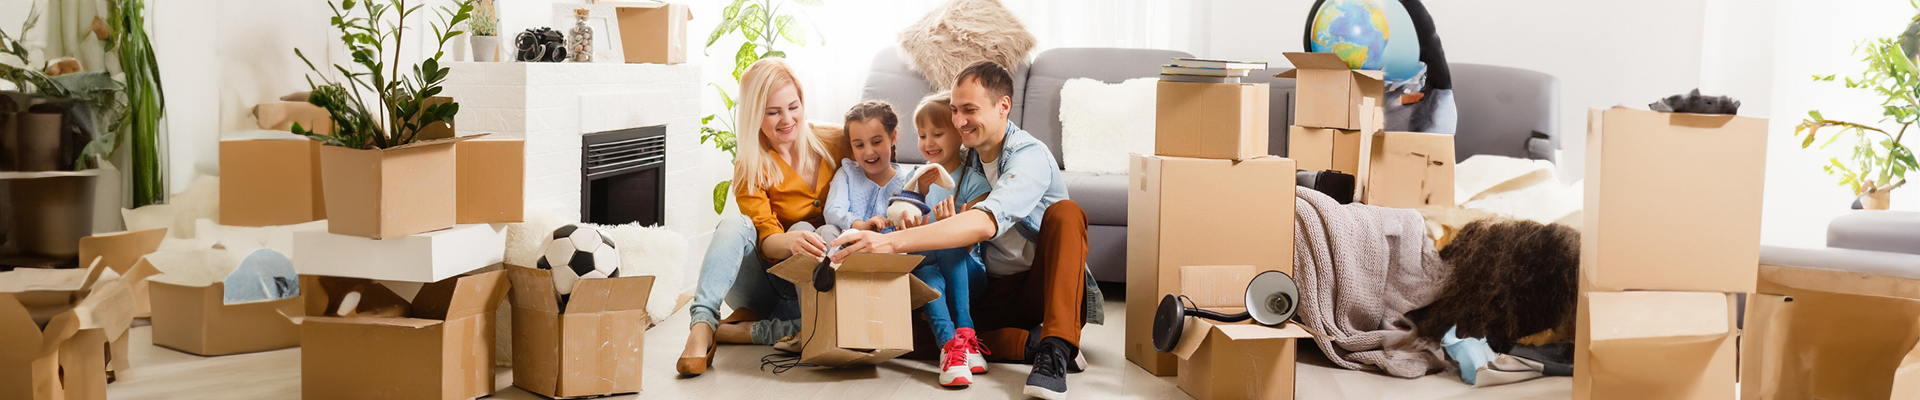 choosing a Chicago moving company Everything you need to know